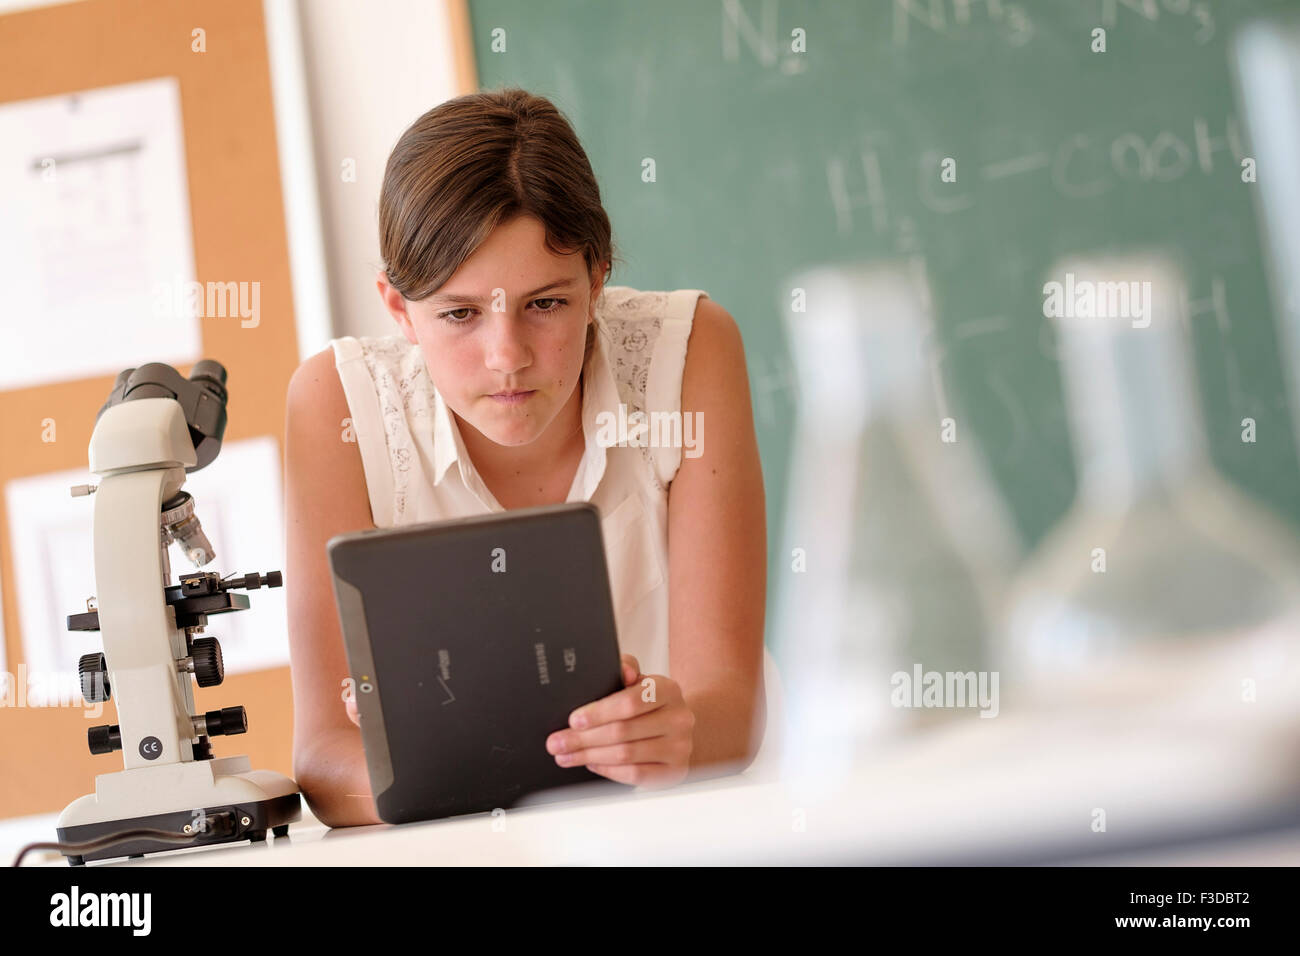 Girl (10-11) using tablet pc in classroom Stock Photo